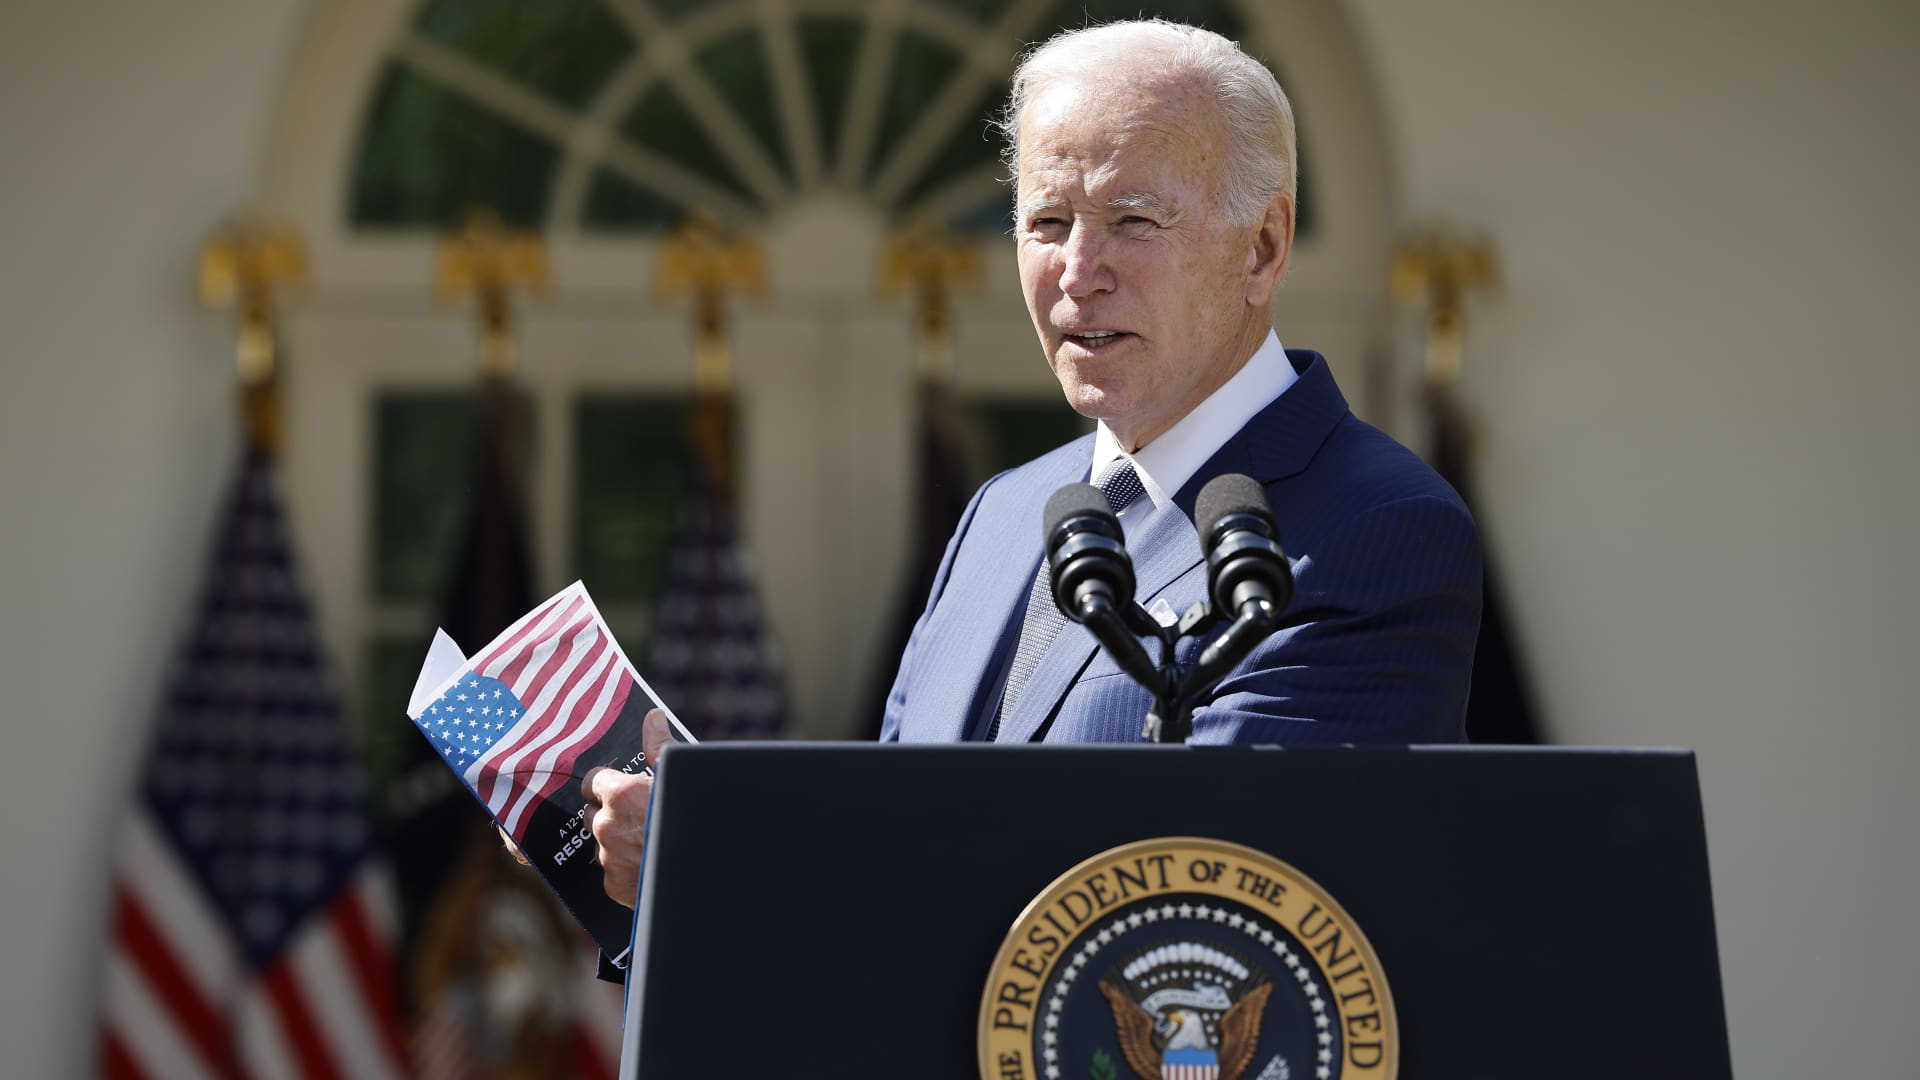 President Joe Biden delivers remarks about lowering health-care costs at a White House Rose Garden event on Sept. 27, 2022.